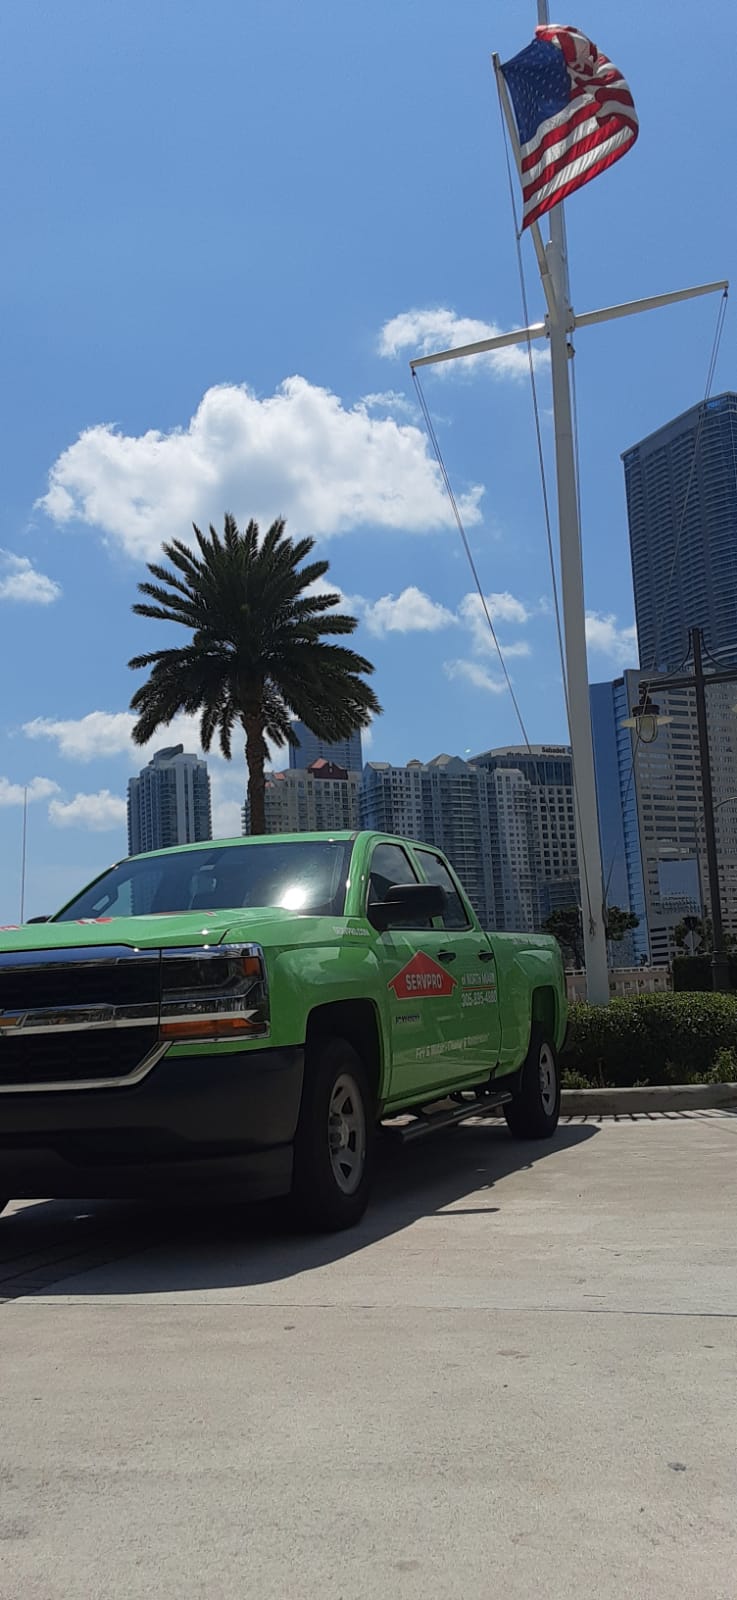 When you see the bright green trucks, you know it's us!